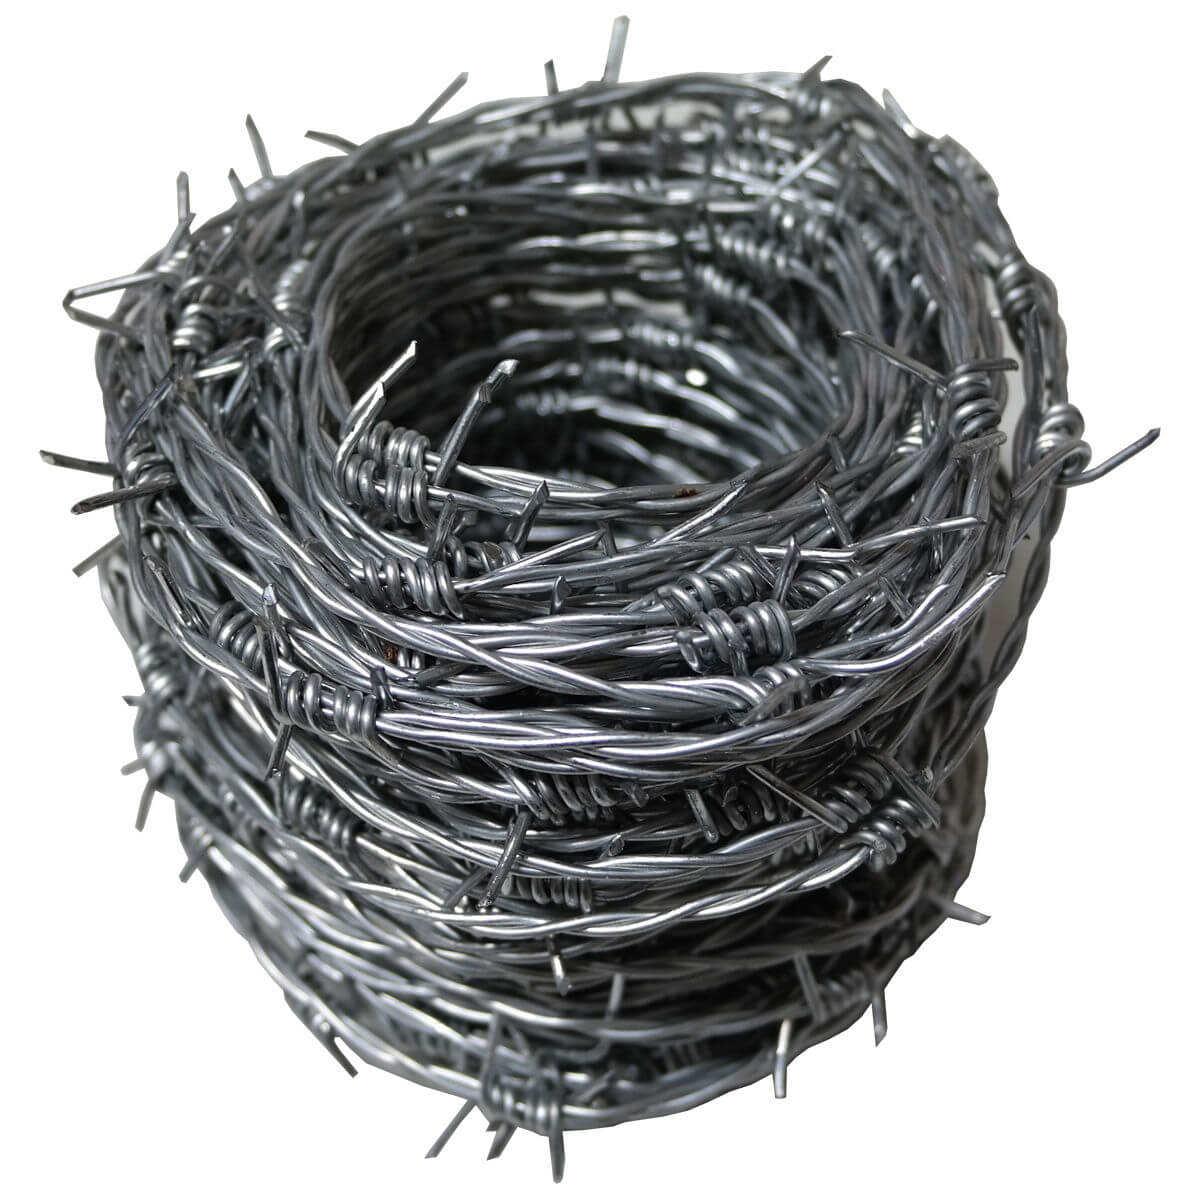 How to dismantle and dispose of an old barbed wire fence